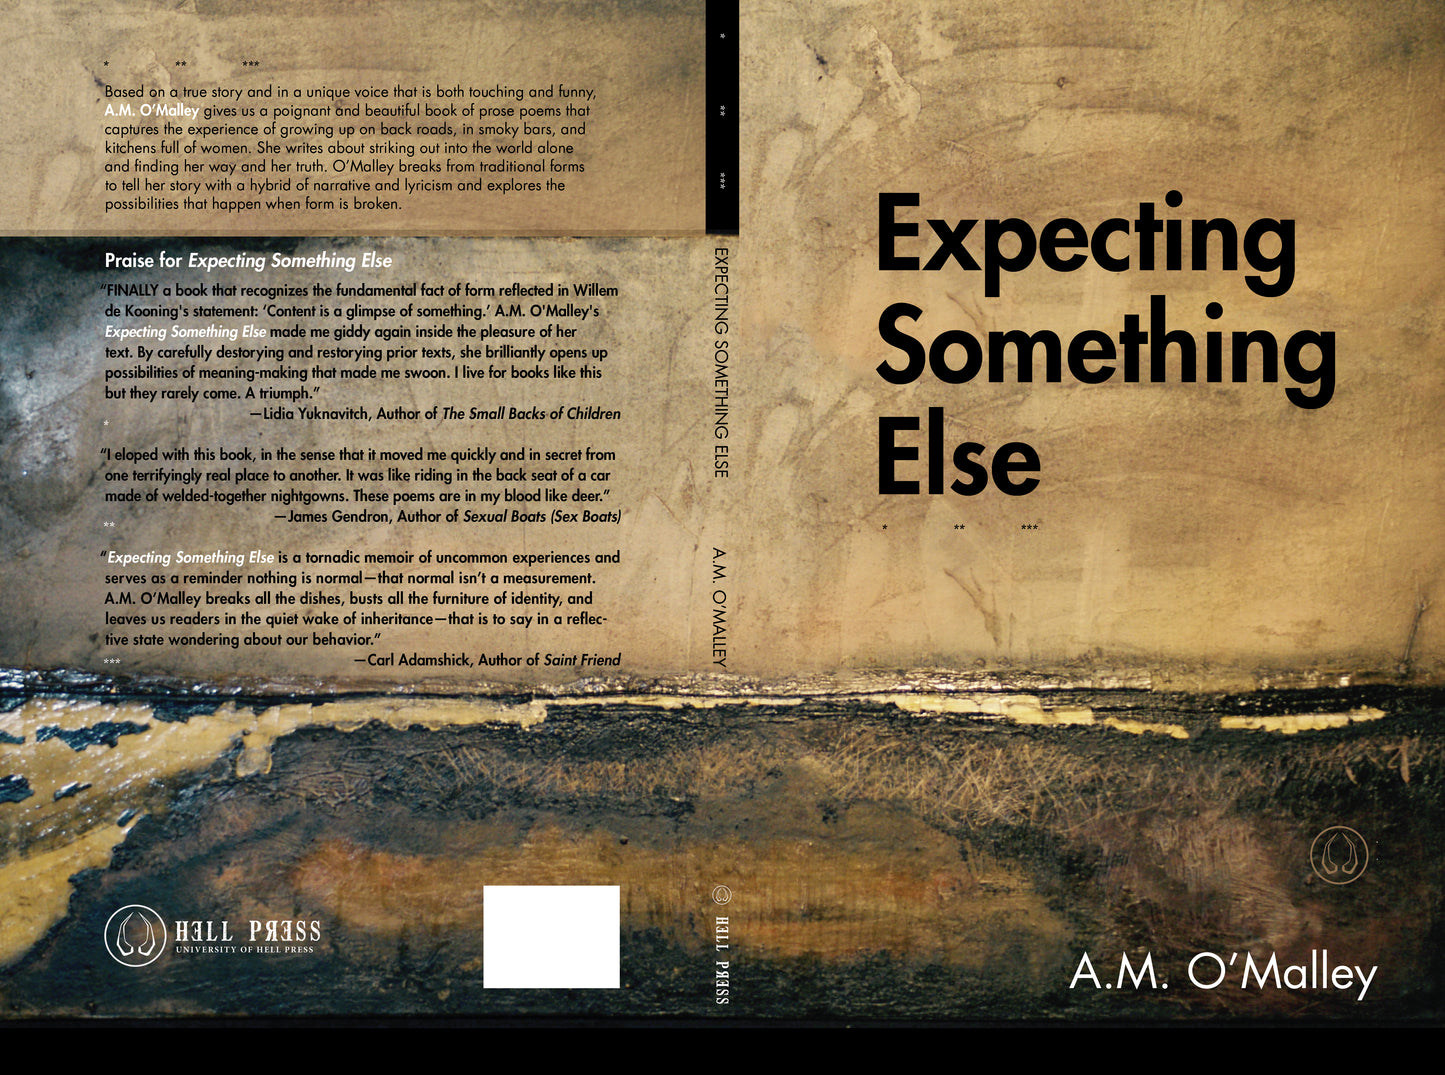 Expecting Something Else by A.M. O'Malley